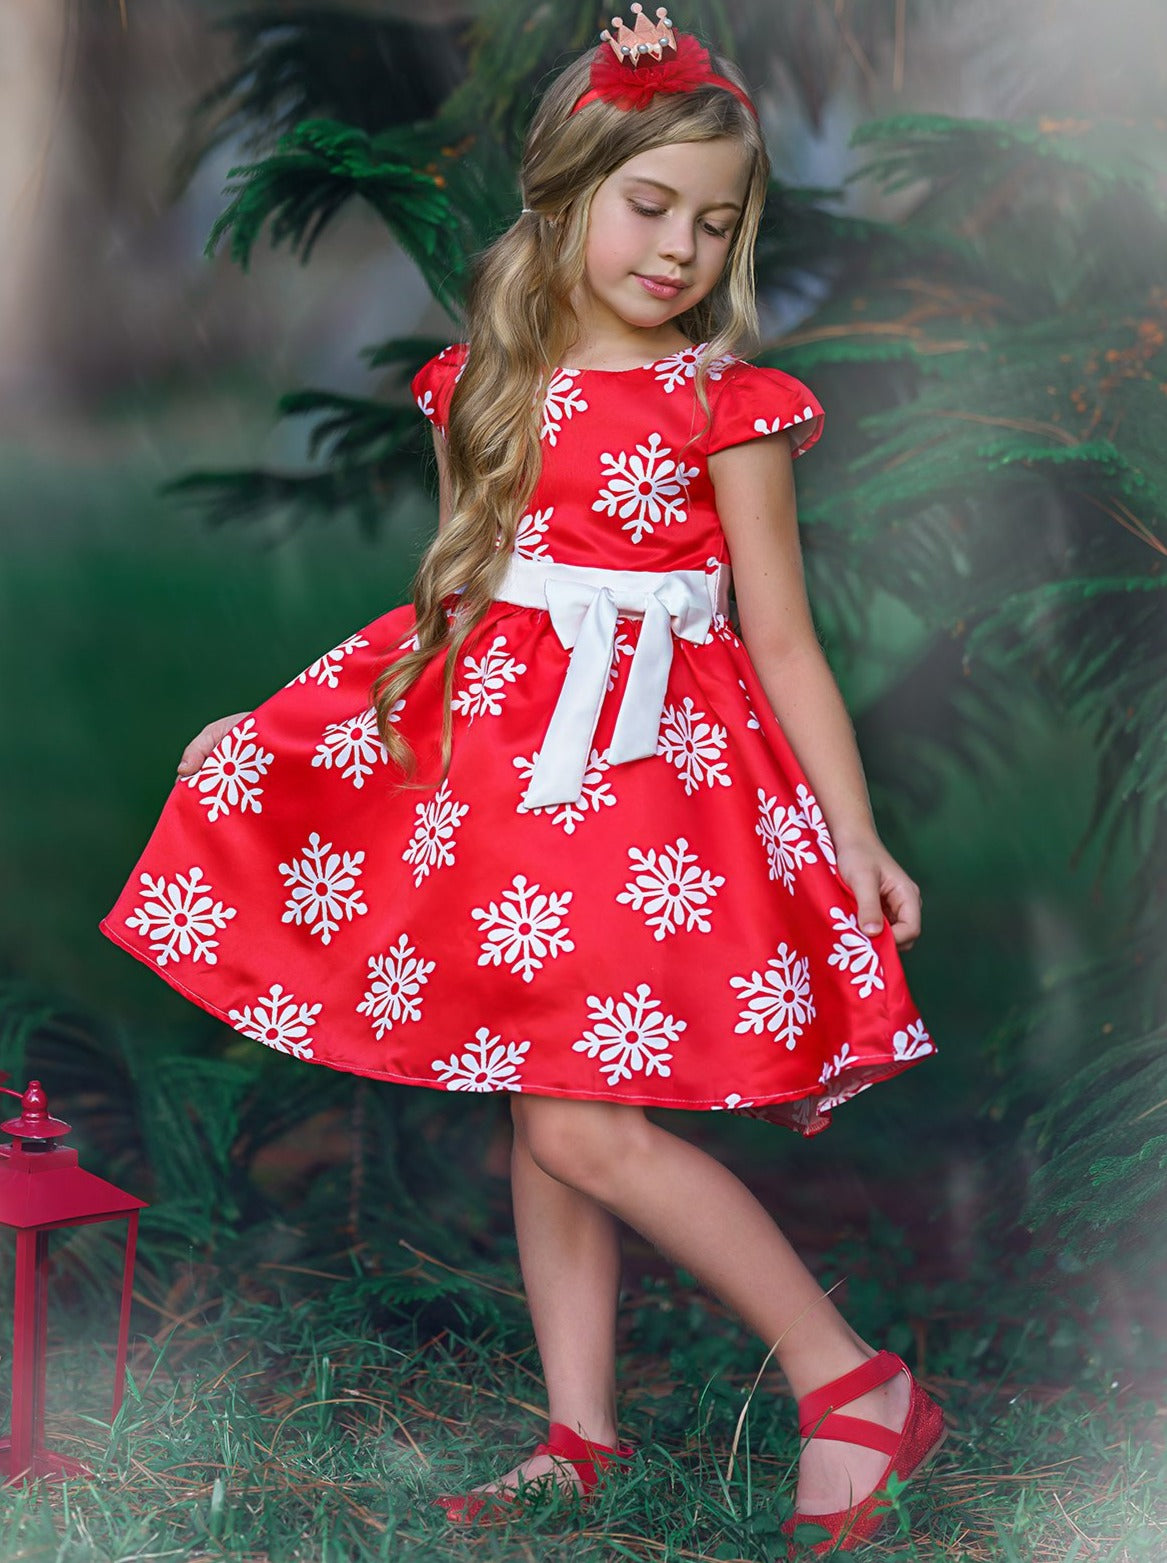 Winter Formal Dresses | Girls Red Cap Sleeve Snowflake Holiday Dress ...